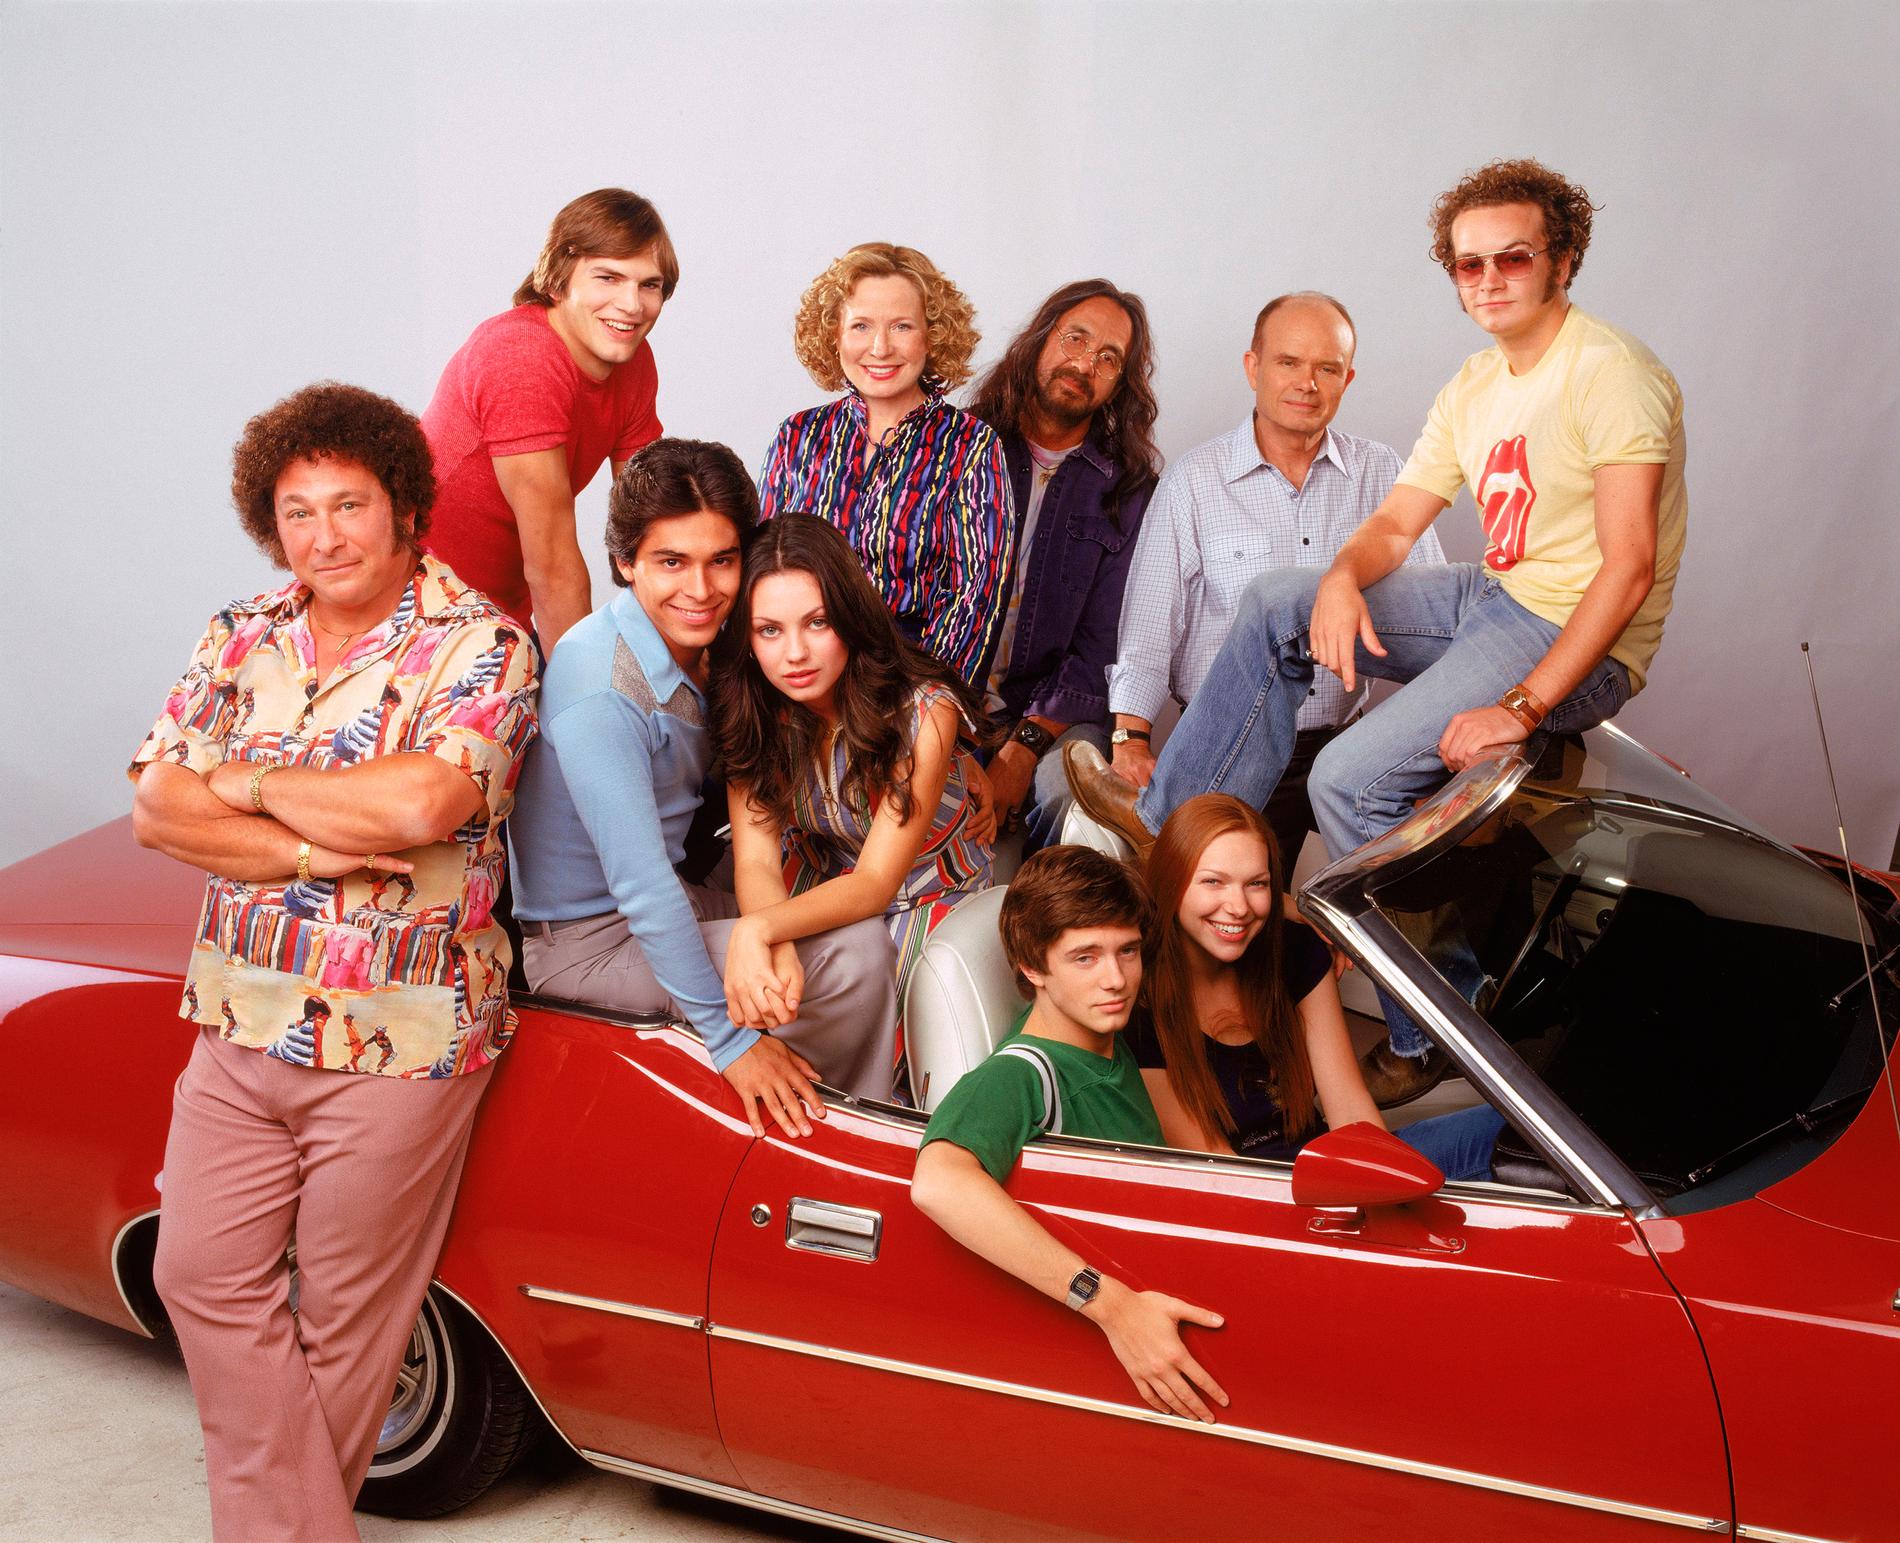 ”That 70´s show”.